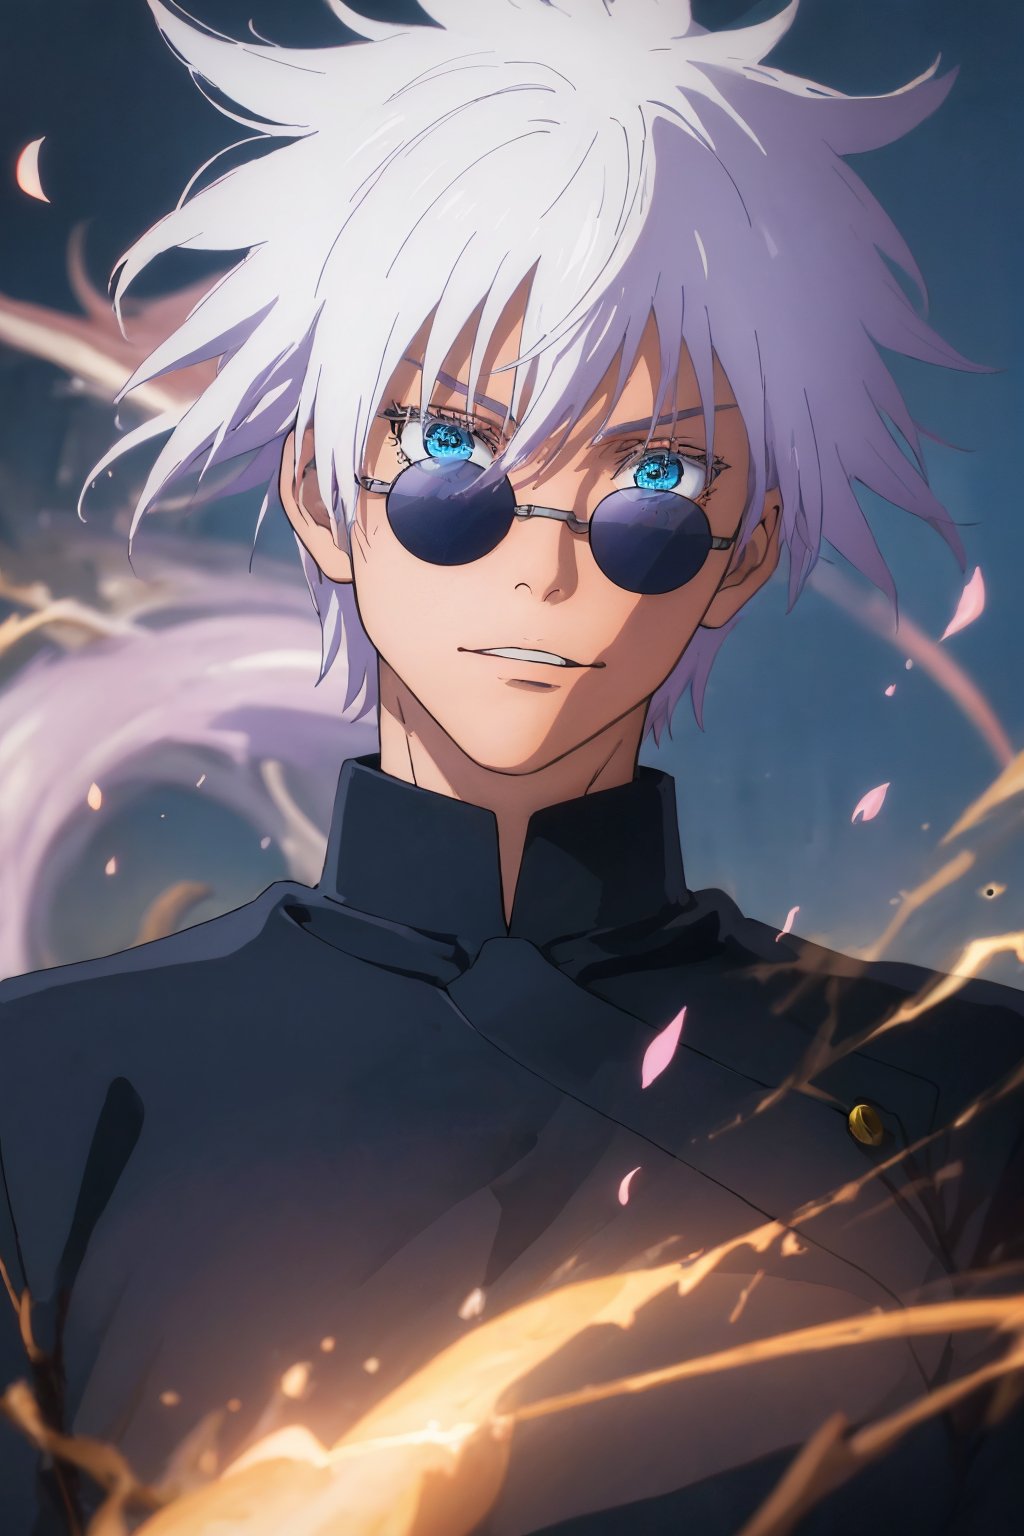 (best quality,4k,8k,highres,masterpiece:1.2),ultra-detailed,(realistic,photorealistic,photo-realistic:1.37),jujutsu Kaisen, Satoru Gojo, intense gaze,fierce expression,dark purple shirt,bright white hair,curly hair,wide-brimmed hat,exclusive black sunglasses,multiple piercing eyes,striking presence,wide grin,strong facial features,aura of power,lit glow behind sunglasses,action-packed scene,anime portraiture,sharp focus,expressive brushstrokes,vibrant colors,contrasting tones,magical energy,electric blue atmosphere,mysterious dark background+lightning,controlled chaos,spellbinding charisma,shimmering crimson domain,dynamic movement,hovering sakura petals,evocative lighting,mesmerizing power,eye-catching visual spectacle